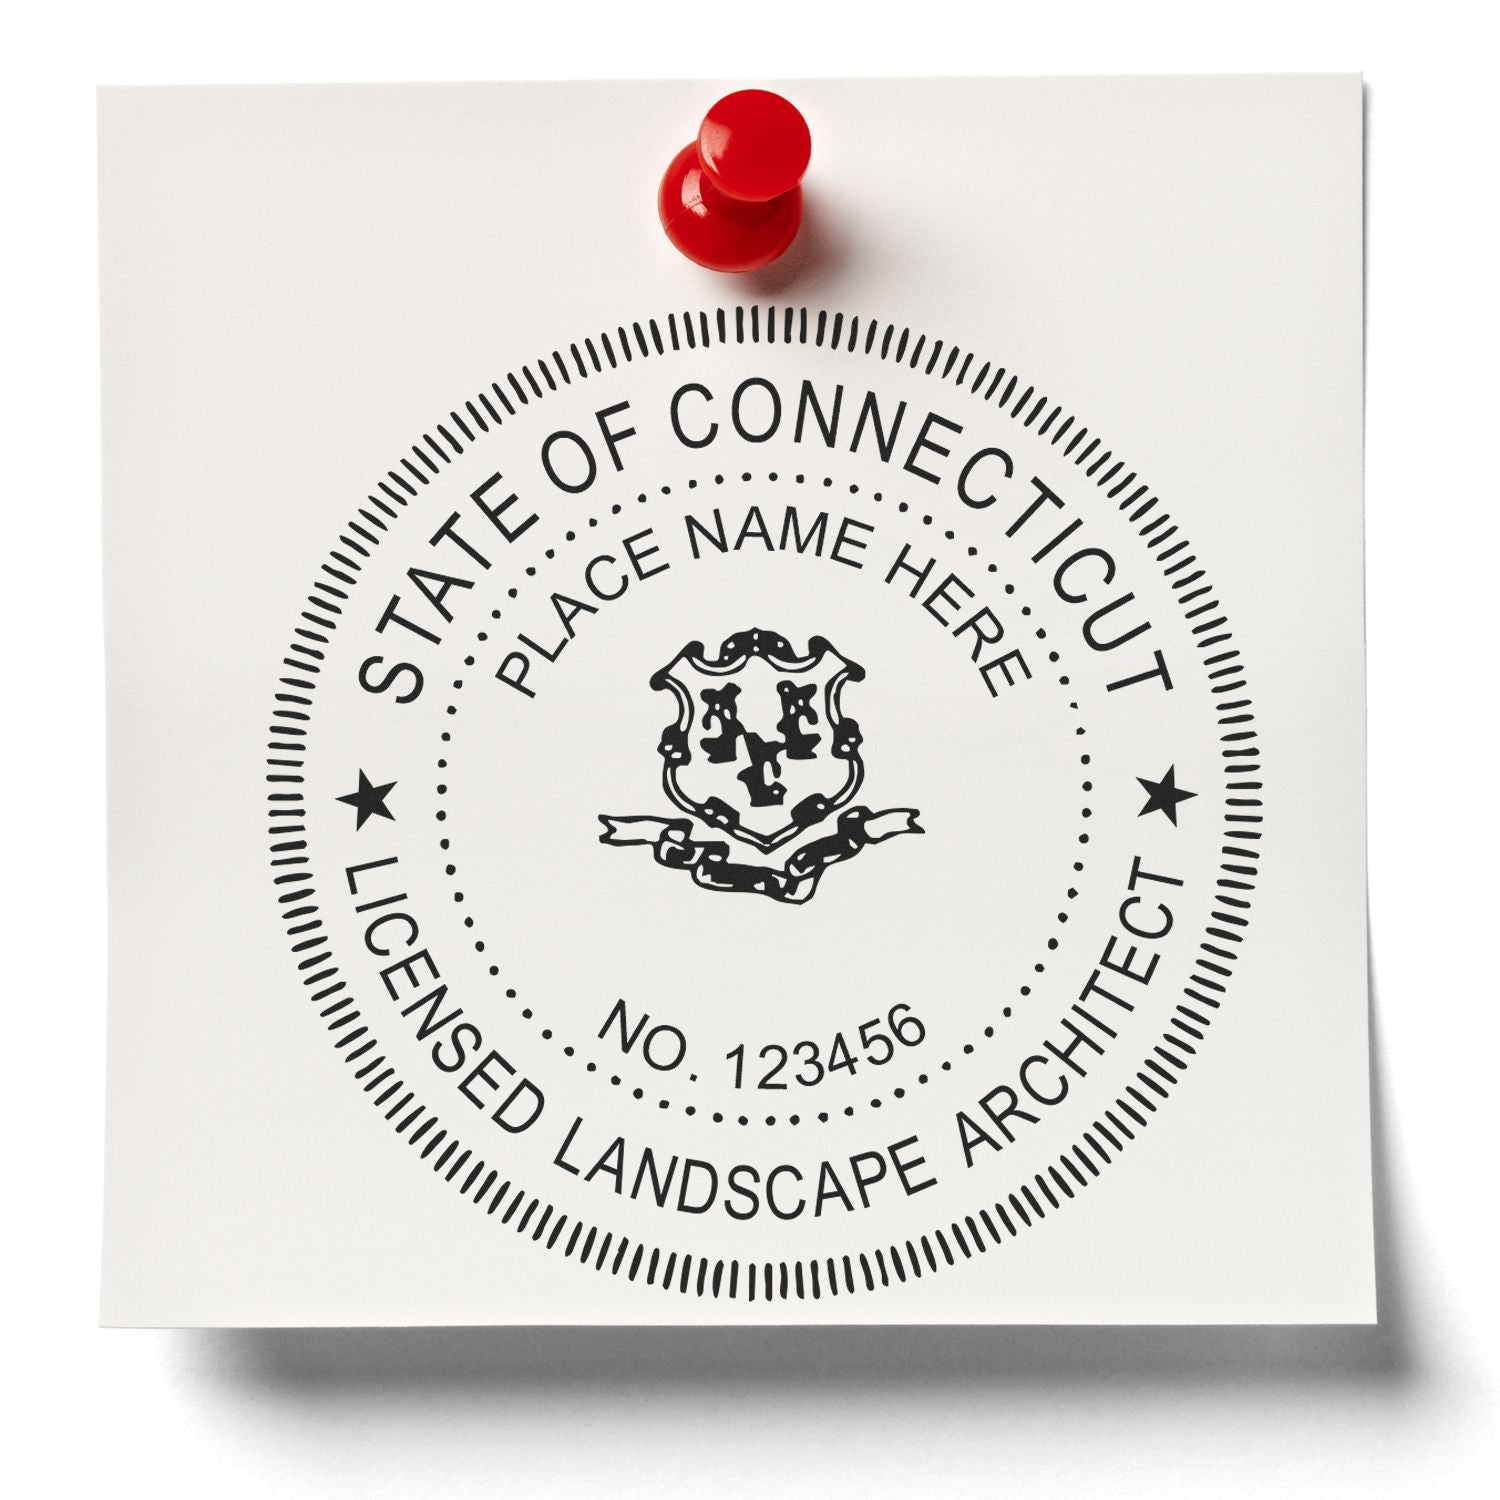 A stamped impression of the Self-Inking Connecticut Landscape Architect Stamp in this stylish lifestyle photo, setting the tone for a unique and personalized product.